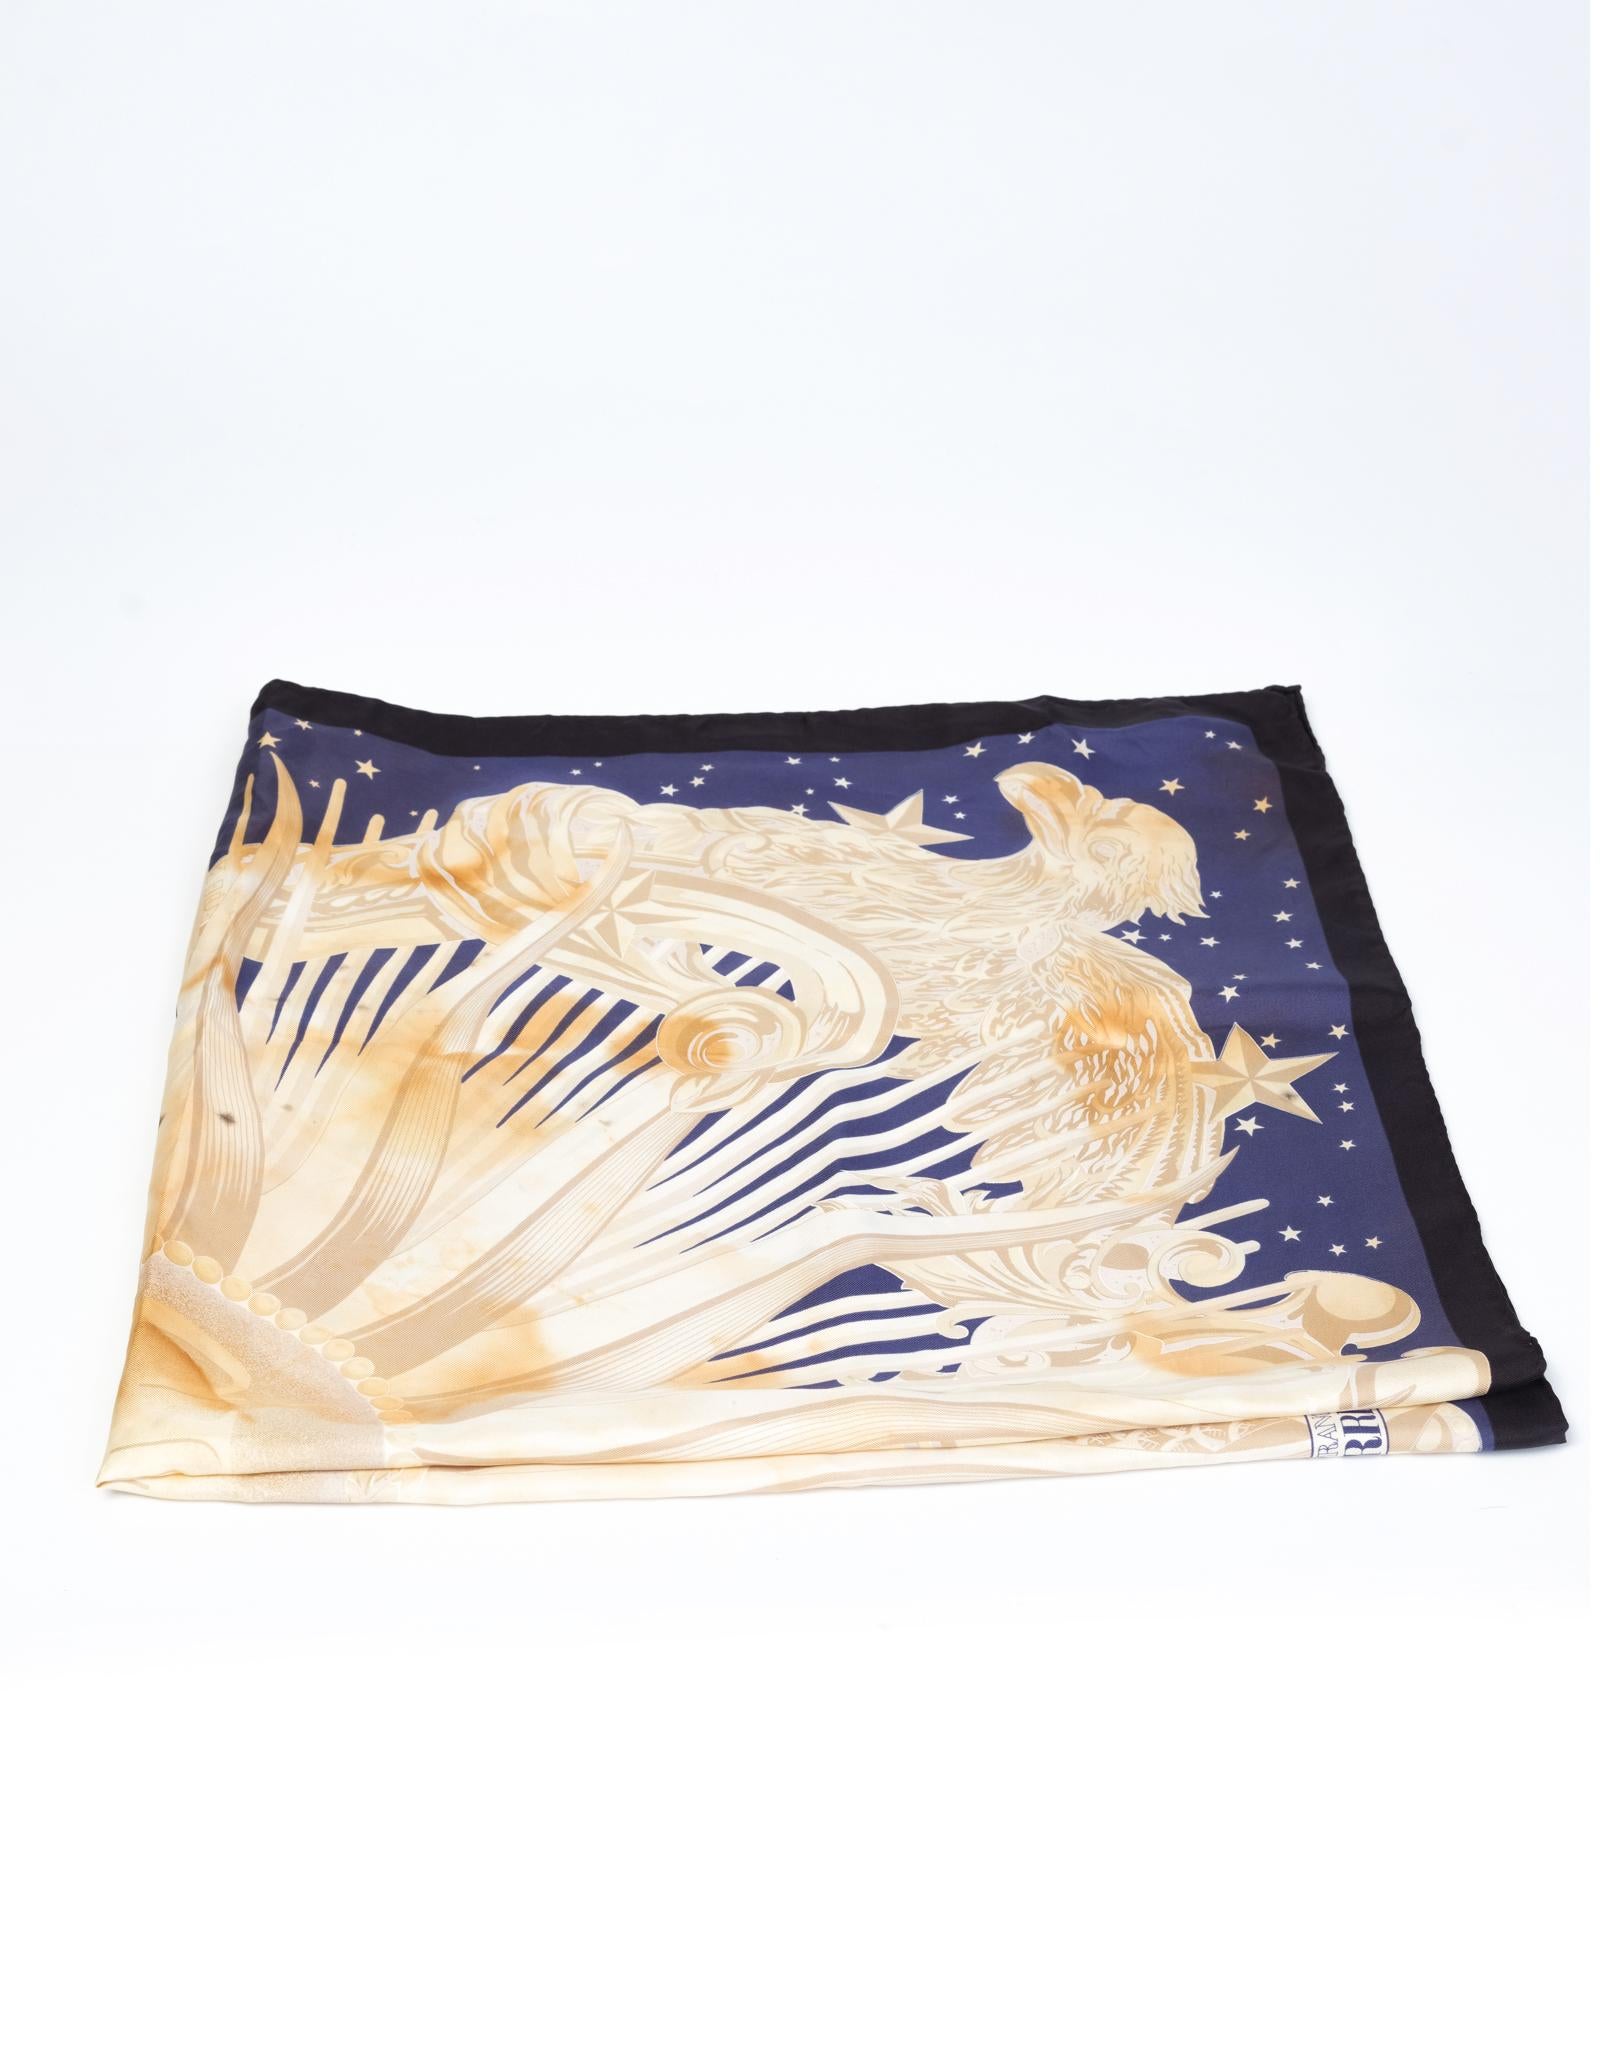 Romantic Cherub Painting Black neckerchief. Cashmere blend.
A Regal sun and star motif centers this silk square scarf. Black border and FERRE Printed logo define this hard to find vintage scarf. 

COLOR: Blue and gold
MATERIAL: Silk
MEASUREMENTS: L